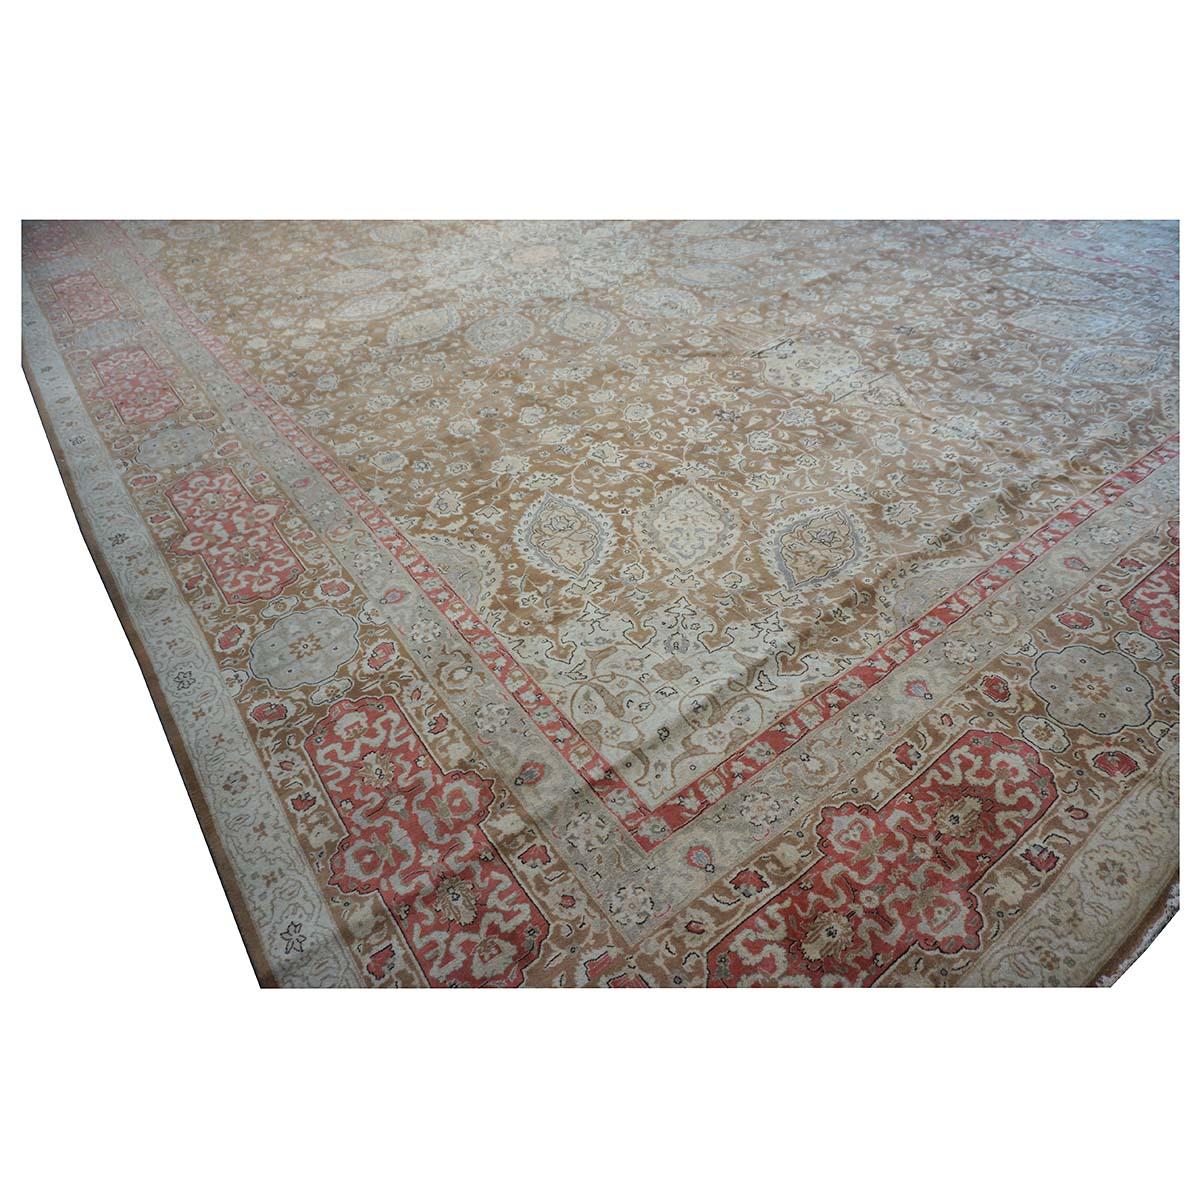 Antique 1930s Persian Tabriz 13x20 Brown & Salmon Oversized Handmade Area Rug For Sale 4